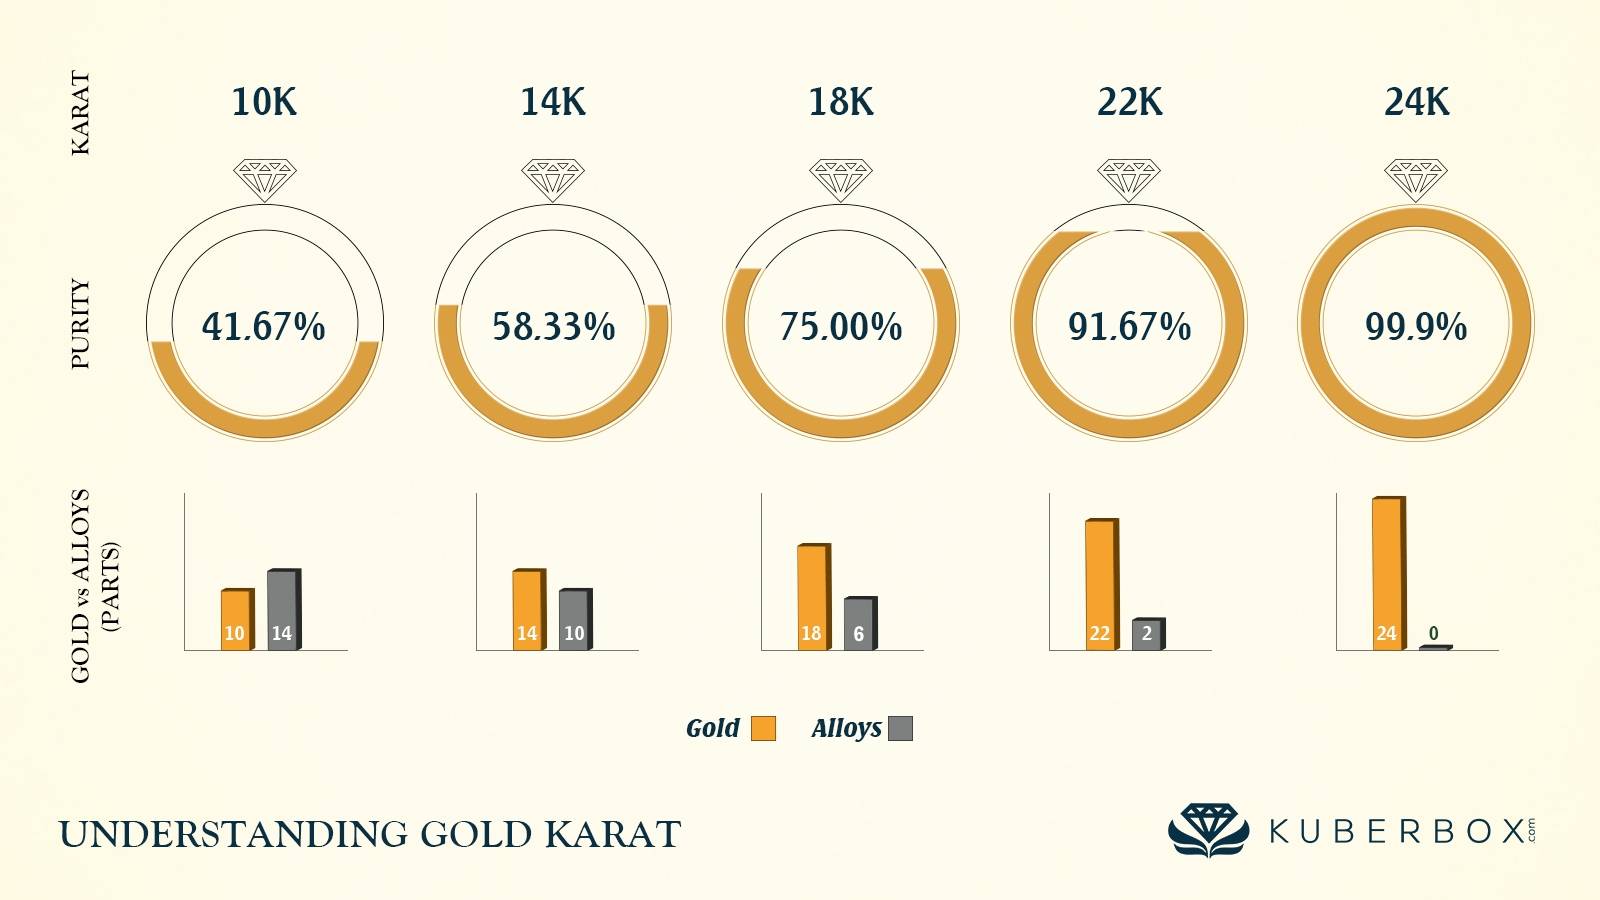 Different karat of gold represents different purity of gold